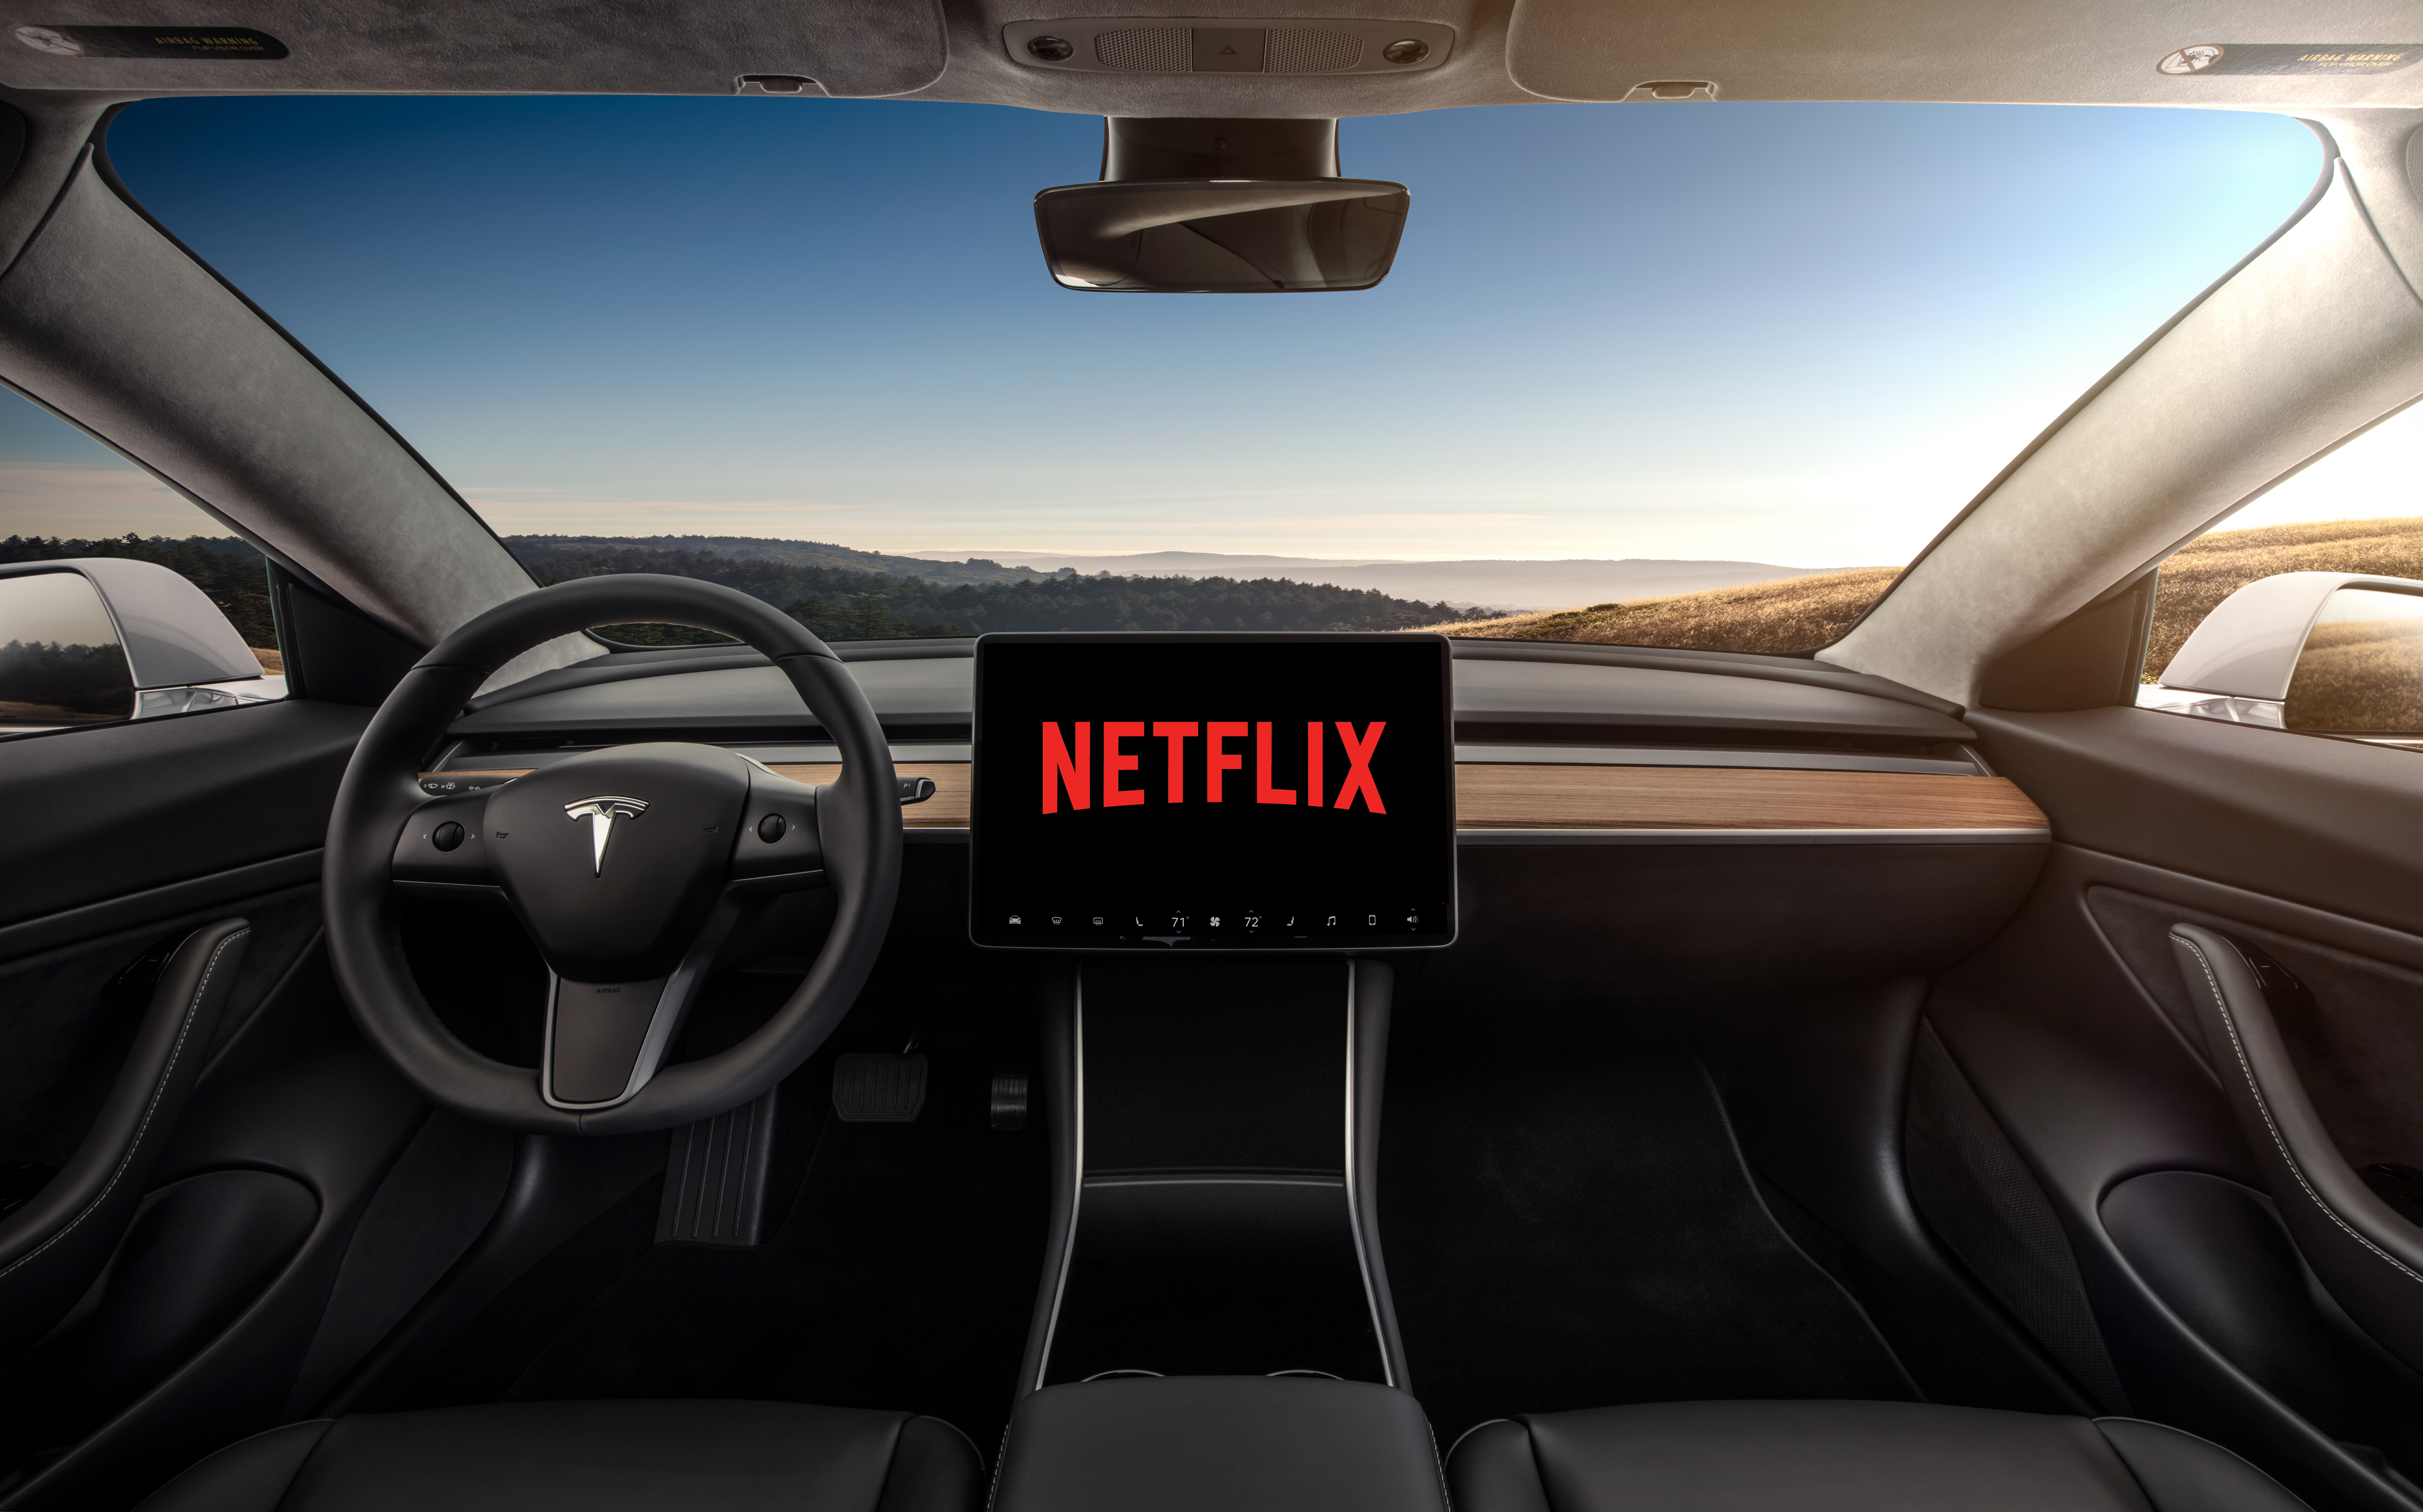 Tesla will deliver in-car YouTube and Netflix video streaming ‘soon’